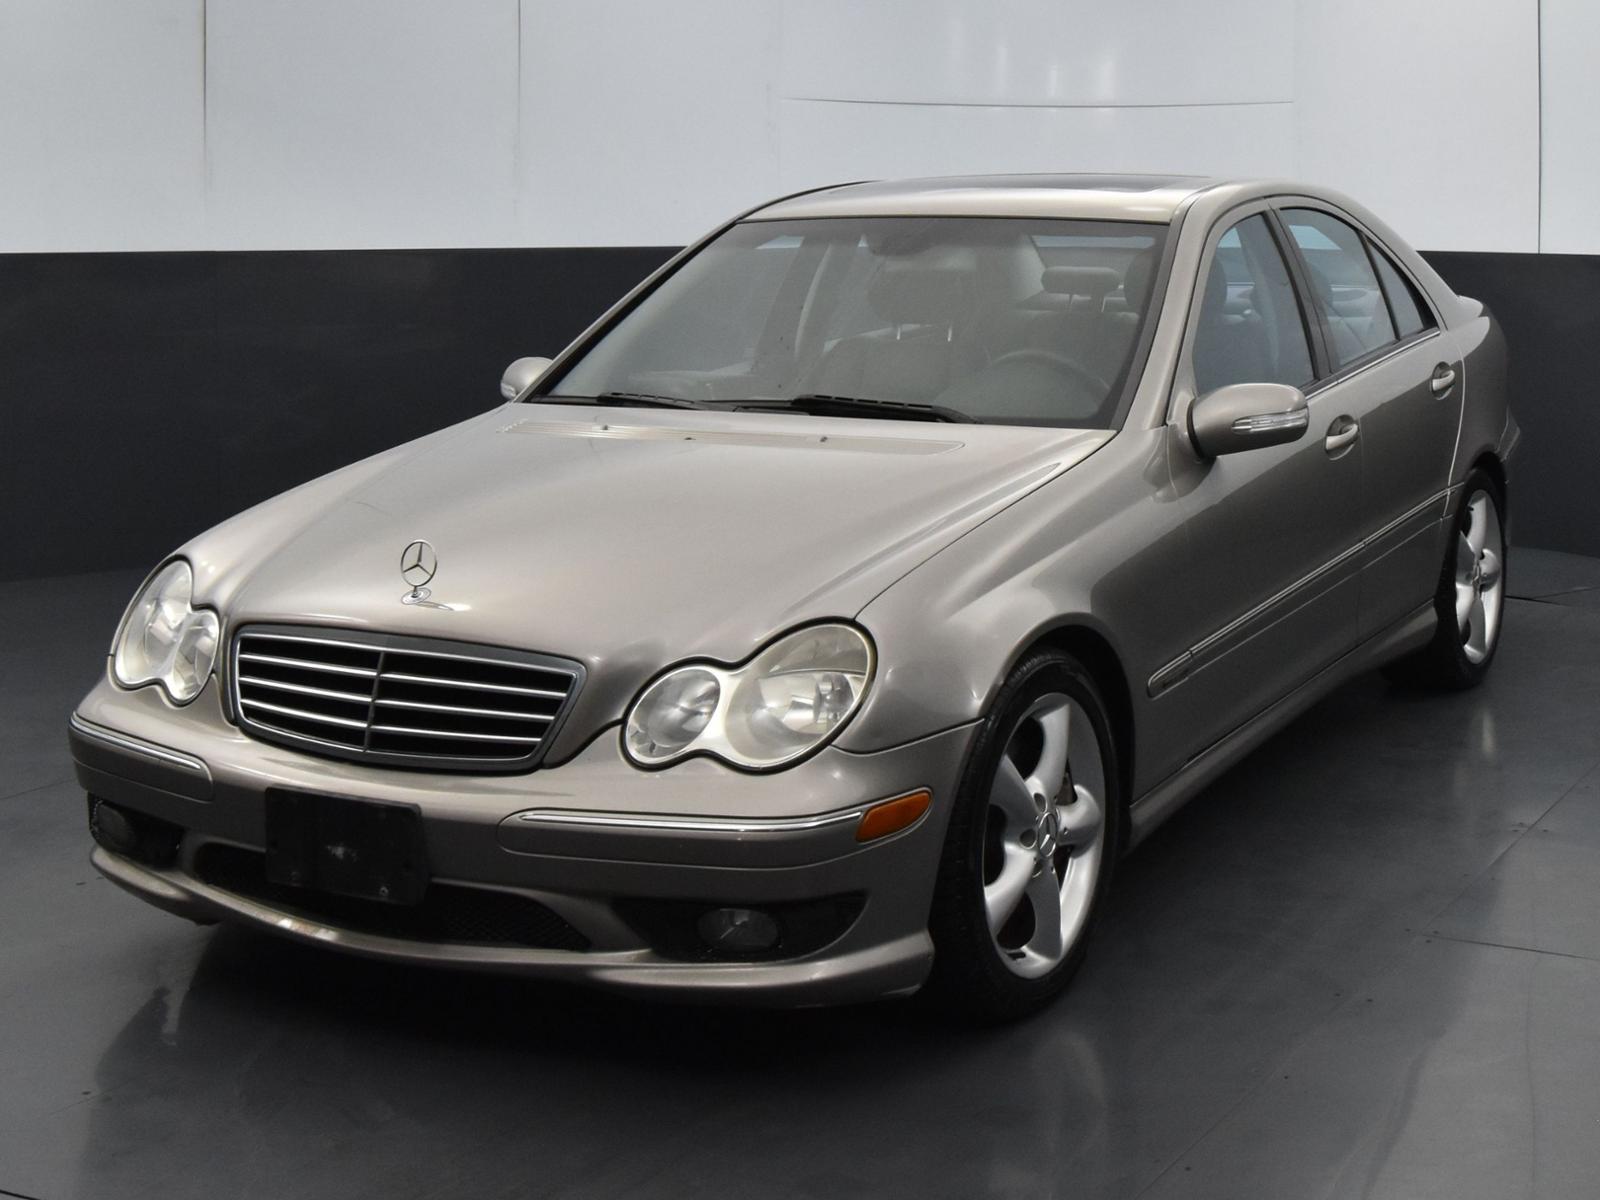 Pre-Owned 2005 Mercedes-Benz C-Class 4dr Sdn Sport 1.8L Auto 4dr Car in  Beaumont #5A798753 | BMW of Beaumont